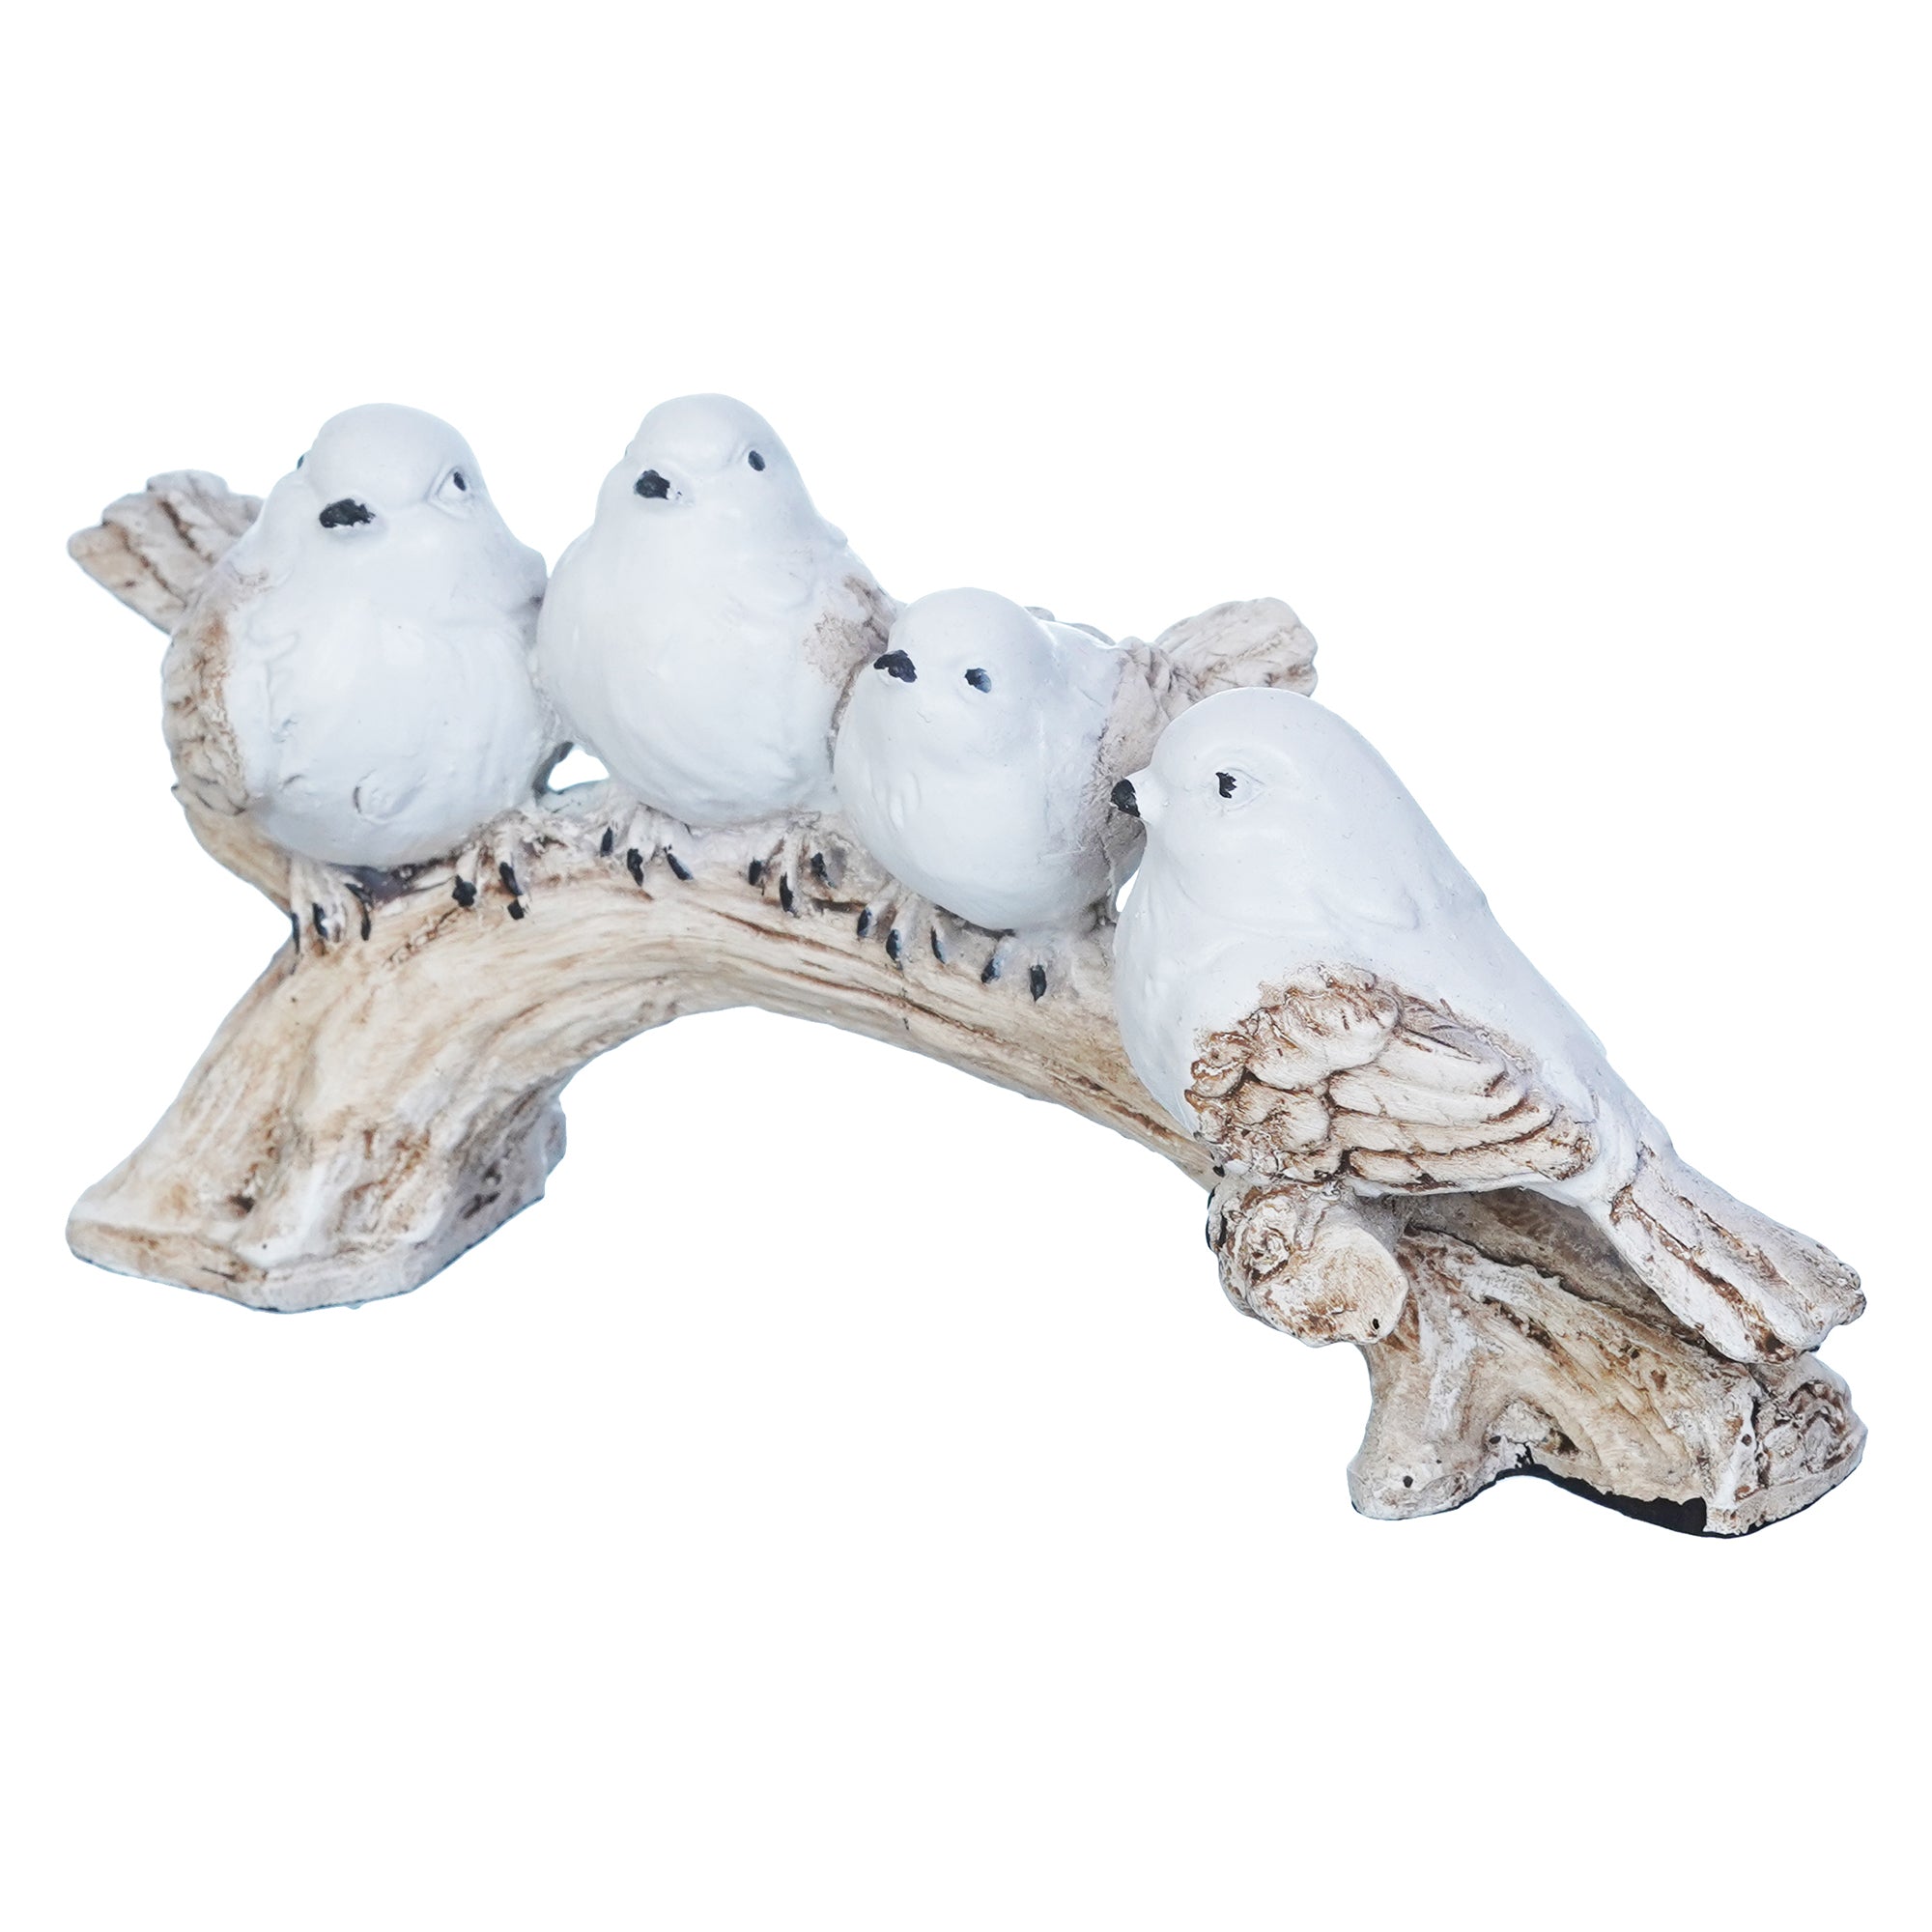 Polyresin Handcrafted 4 White Bird Statues Sitting on Tree Branch Decorative Showpiece 7